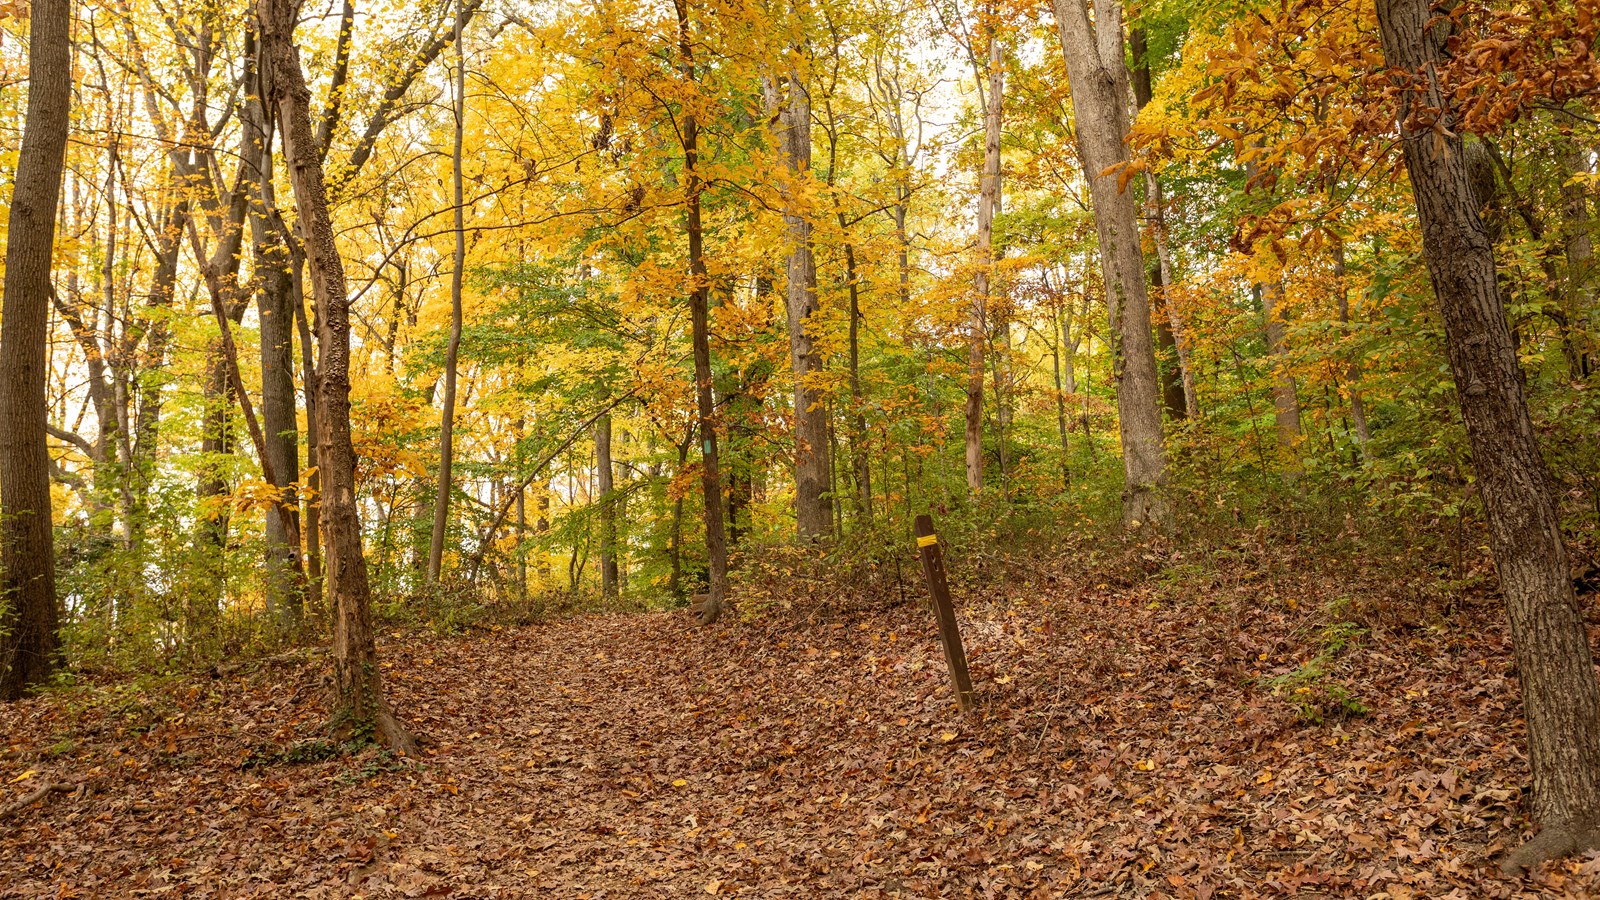 A trail in a forest with leaves changing from green to yellow